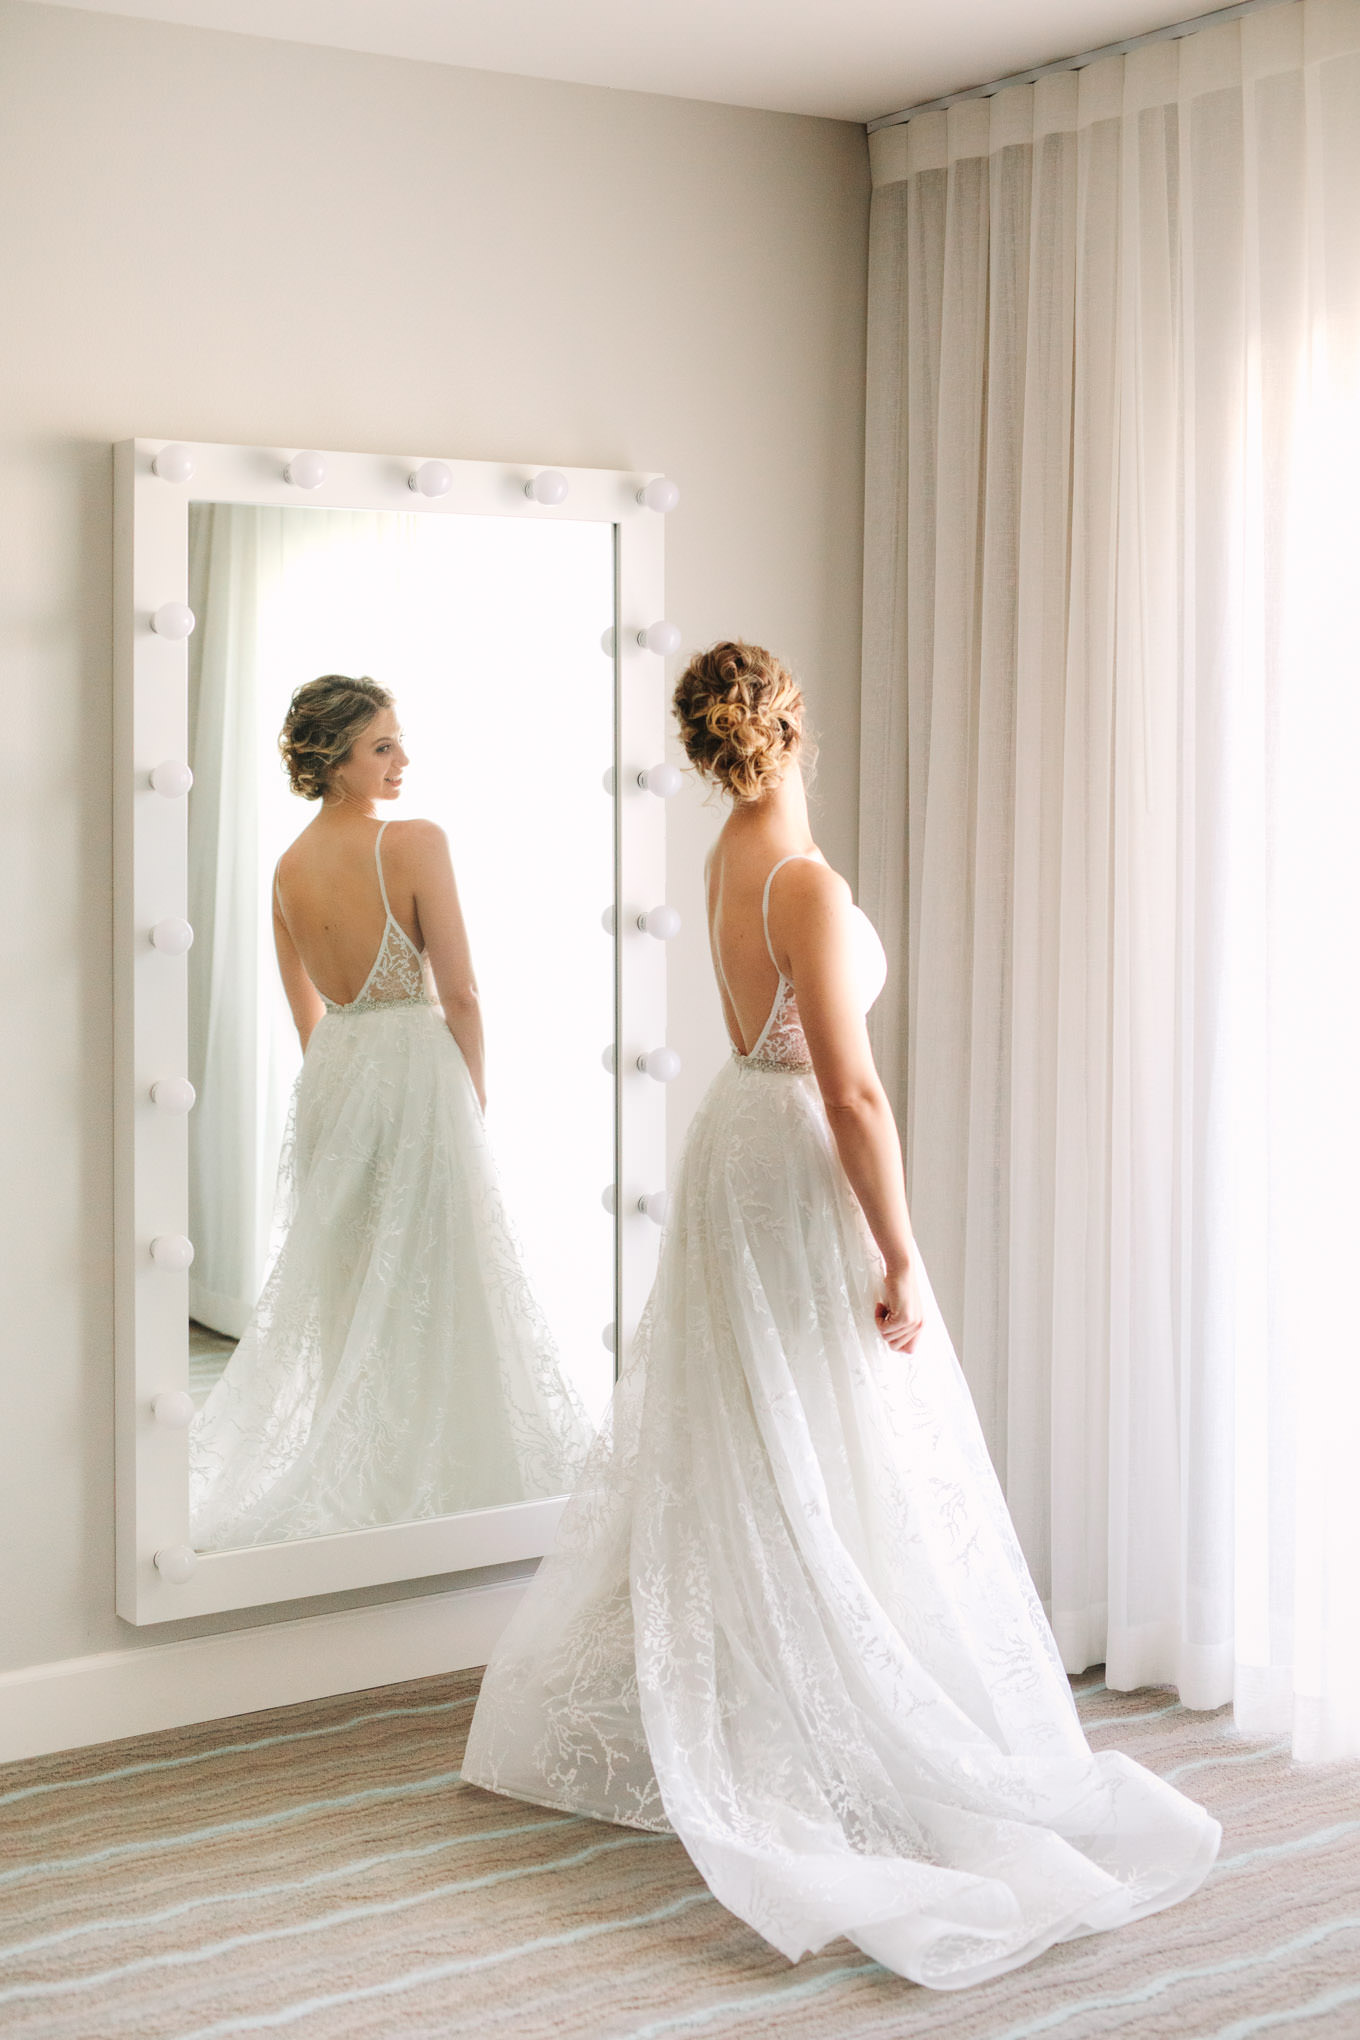 Bride getting ready at Hotel Paseo | Living Desert Zoo & Gardens wedding with unique details | Elevated and colorful wedding photography for fun-loving couples in Southern California |  #PalmSprings #palmspringsphotographer #gardenwedding #palmspringswedding  Source: Mary Costa Photography | Los Angeles wedding photographer 